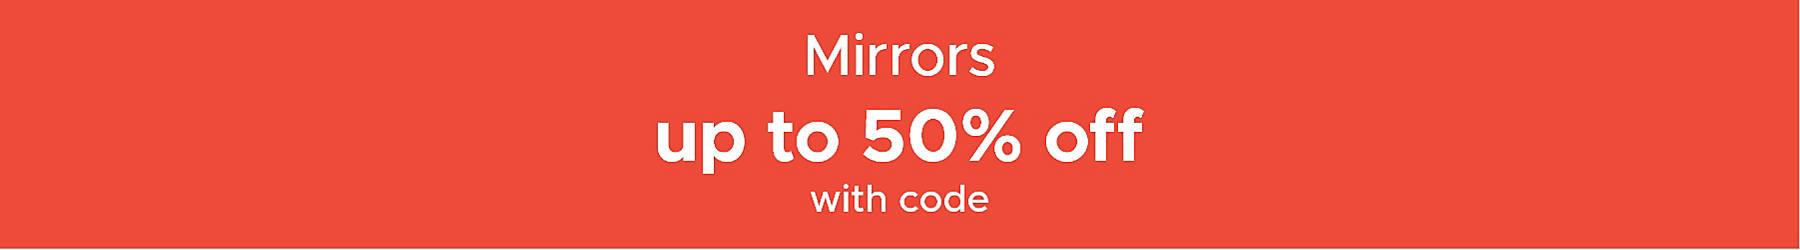 Mirrors up to 50% off with code